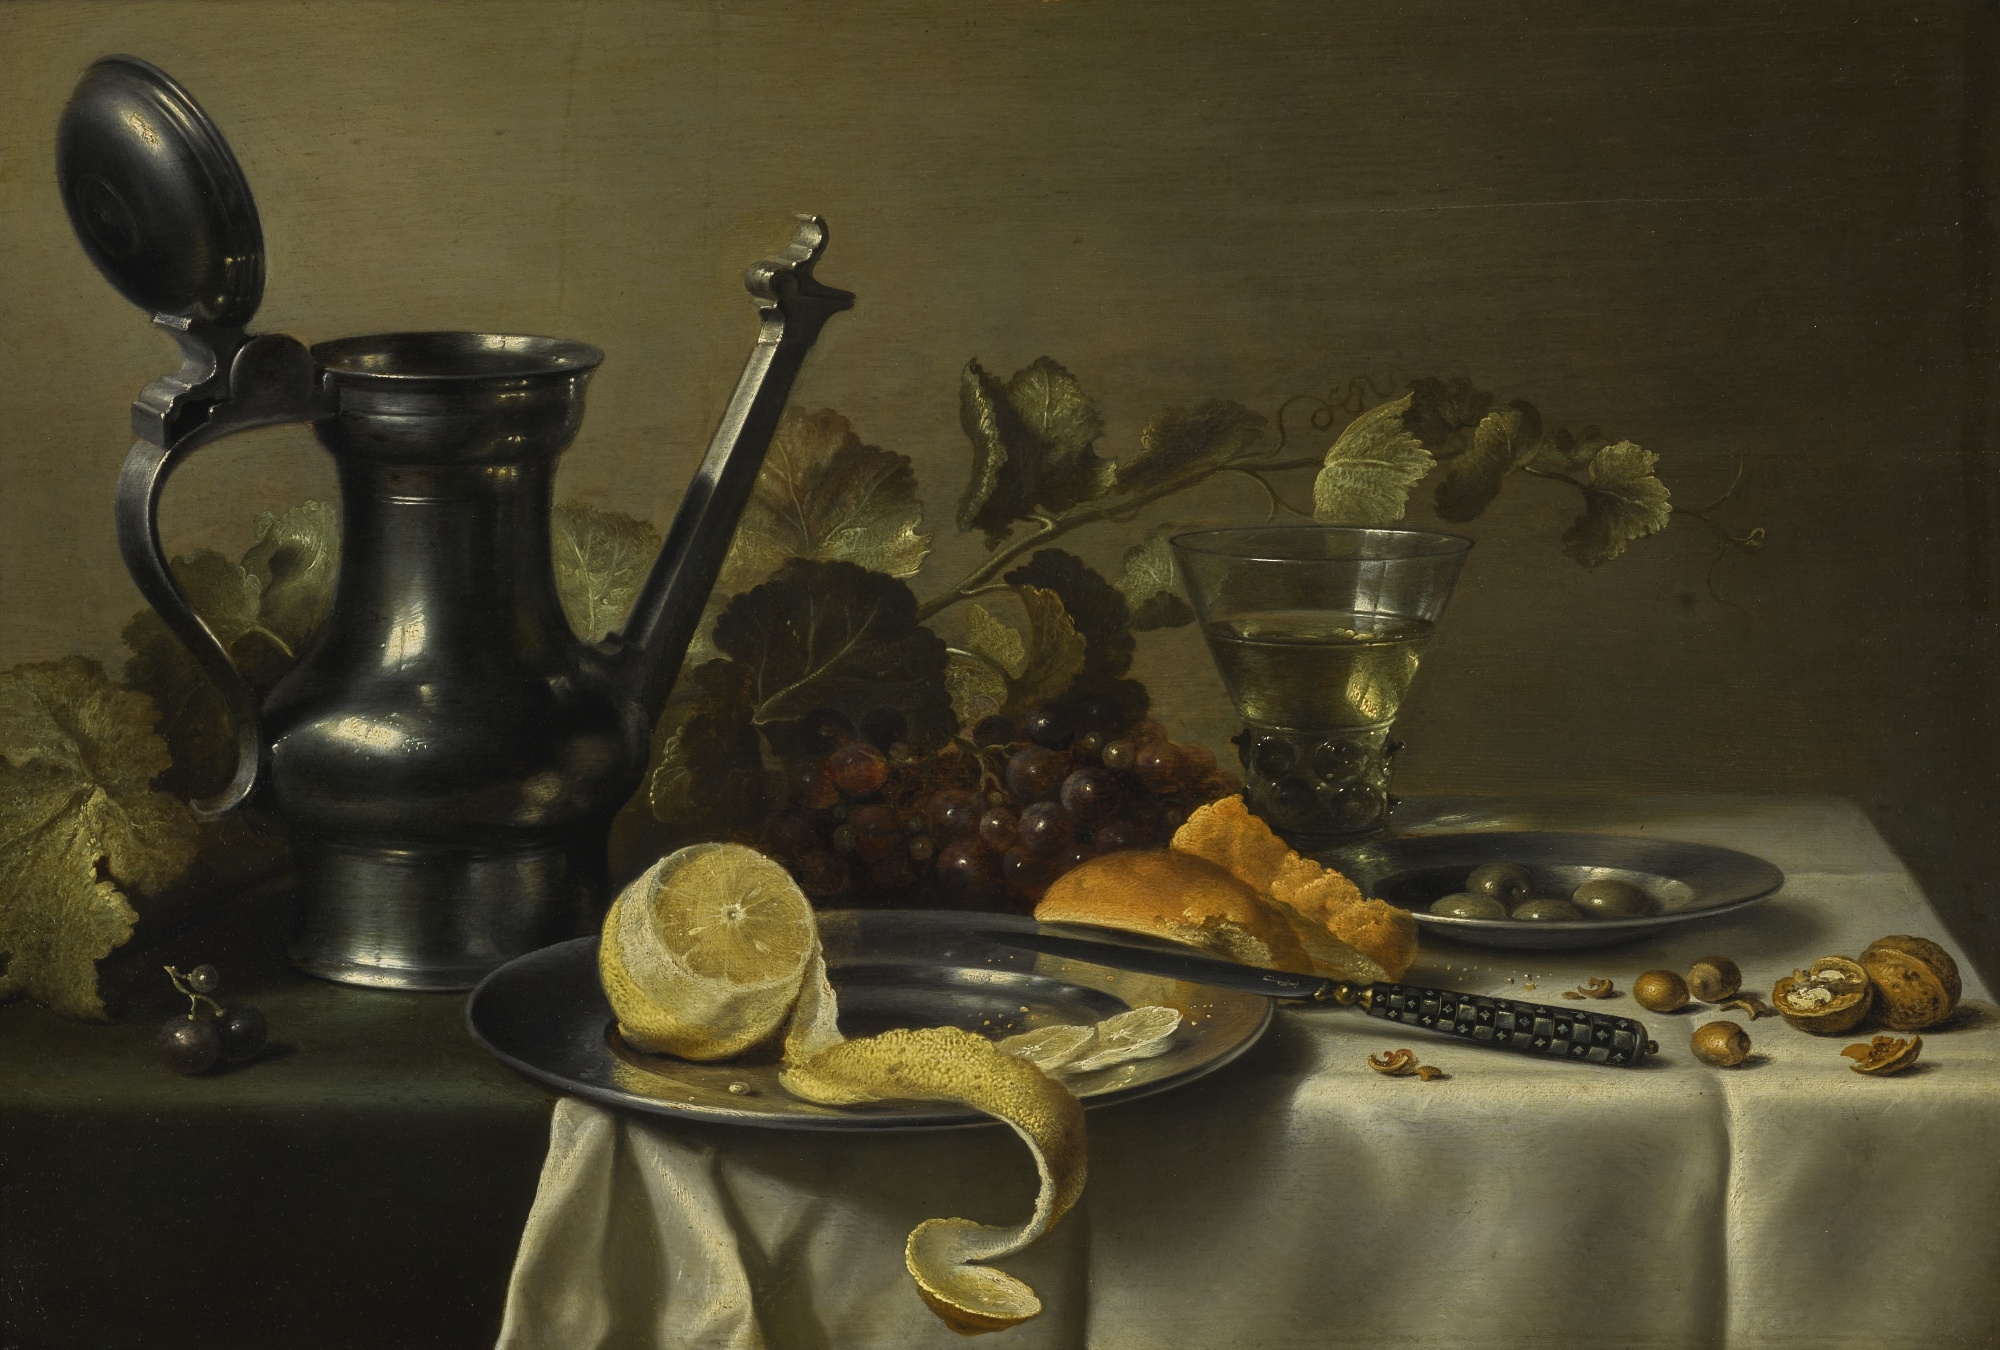 STILL LIFE WITH A 'JAN STEEN' JUG, A PEELED LEMON ON A PEWTER PLATE, BREAD, A KNIFE, OLIVES ON A PEWTER PLATE, GRAPES, A GLASS AND NUTS, ALL ON A TABLE PARTLY DRAPED WITH A WHITE CLOTH by Pieter Claesz